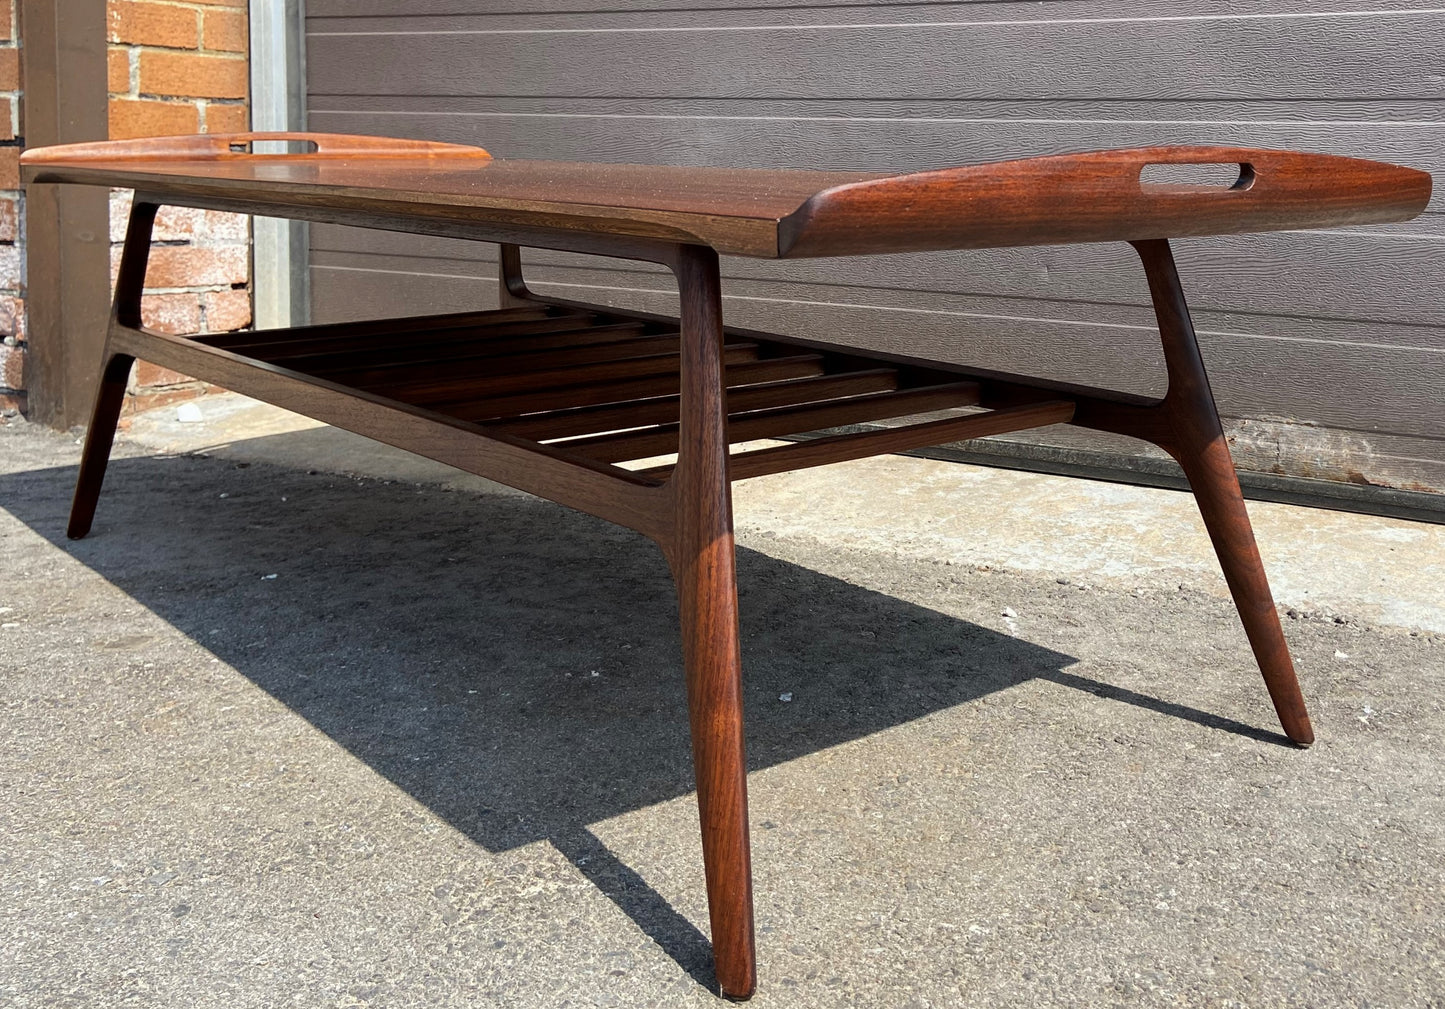 REFINISHED Mid Century Modern Walnut tray-style coffee table, Perfect